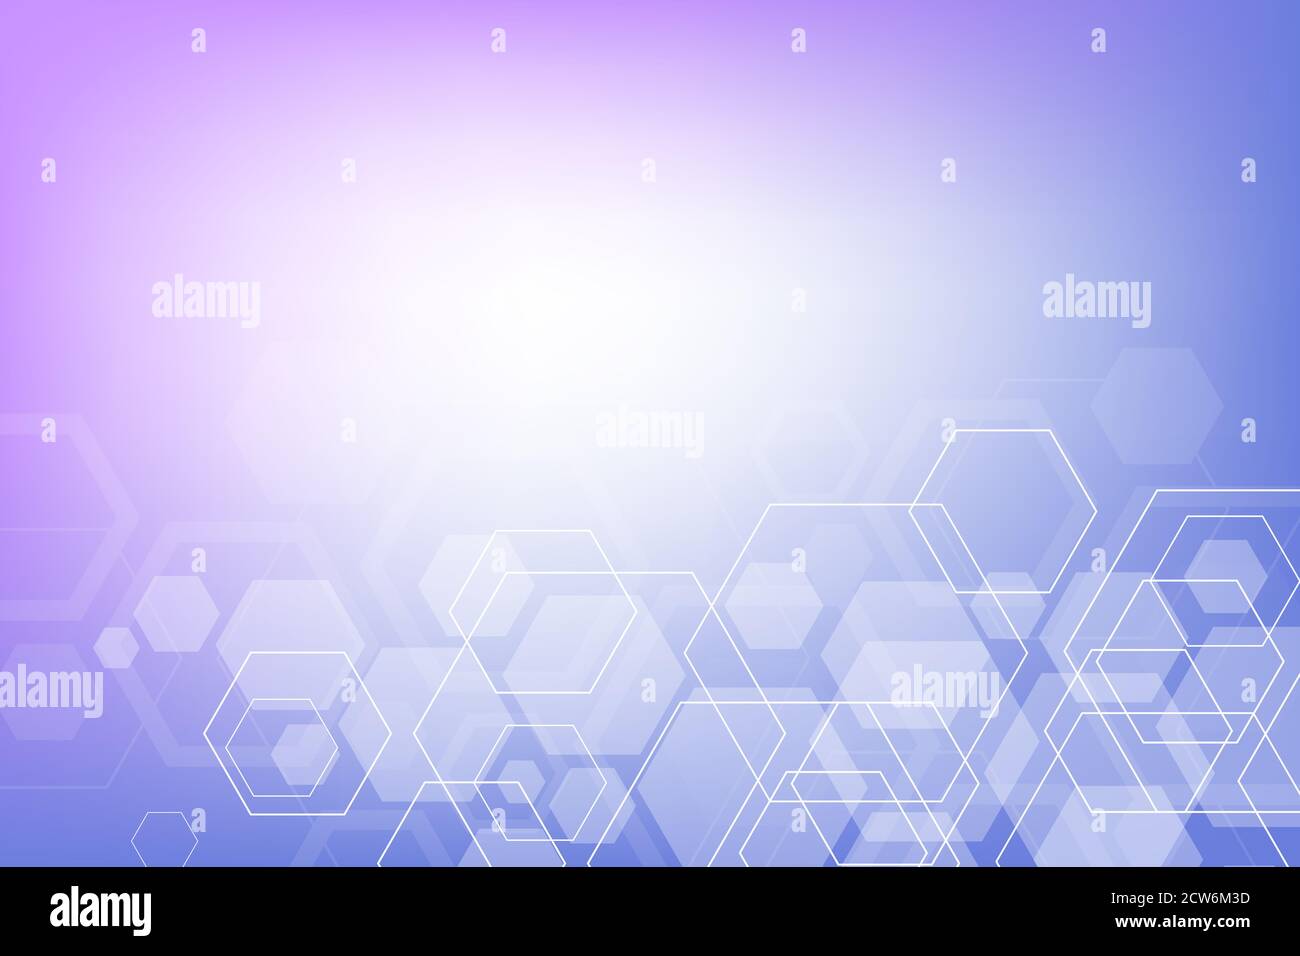 Abstract medical background DNA research, molecule, genetics, genome, DNA chain. Genetic analysis art concept with hexagons, lines, dots Stock Photo